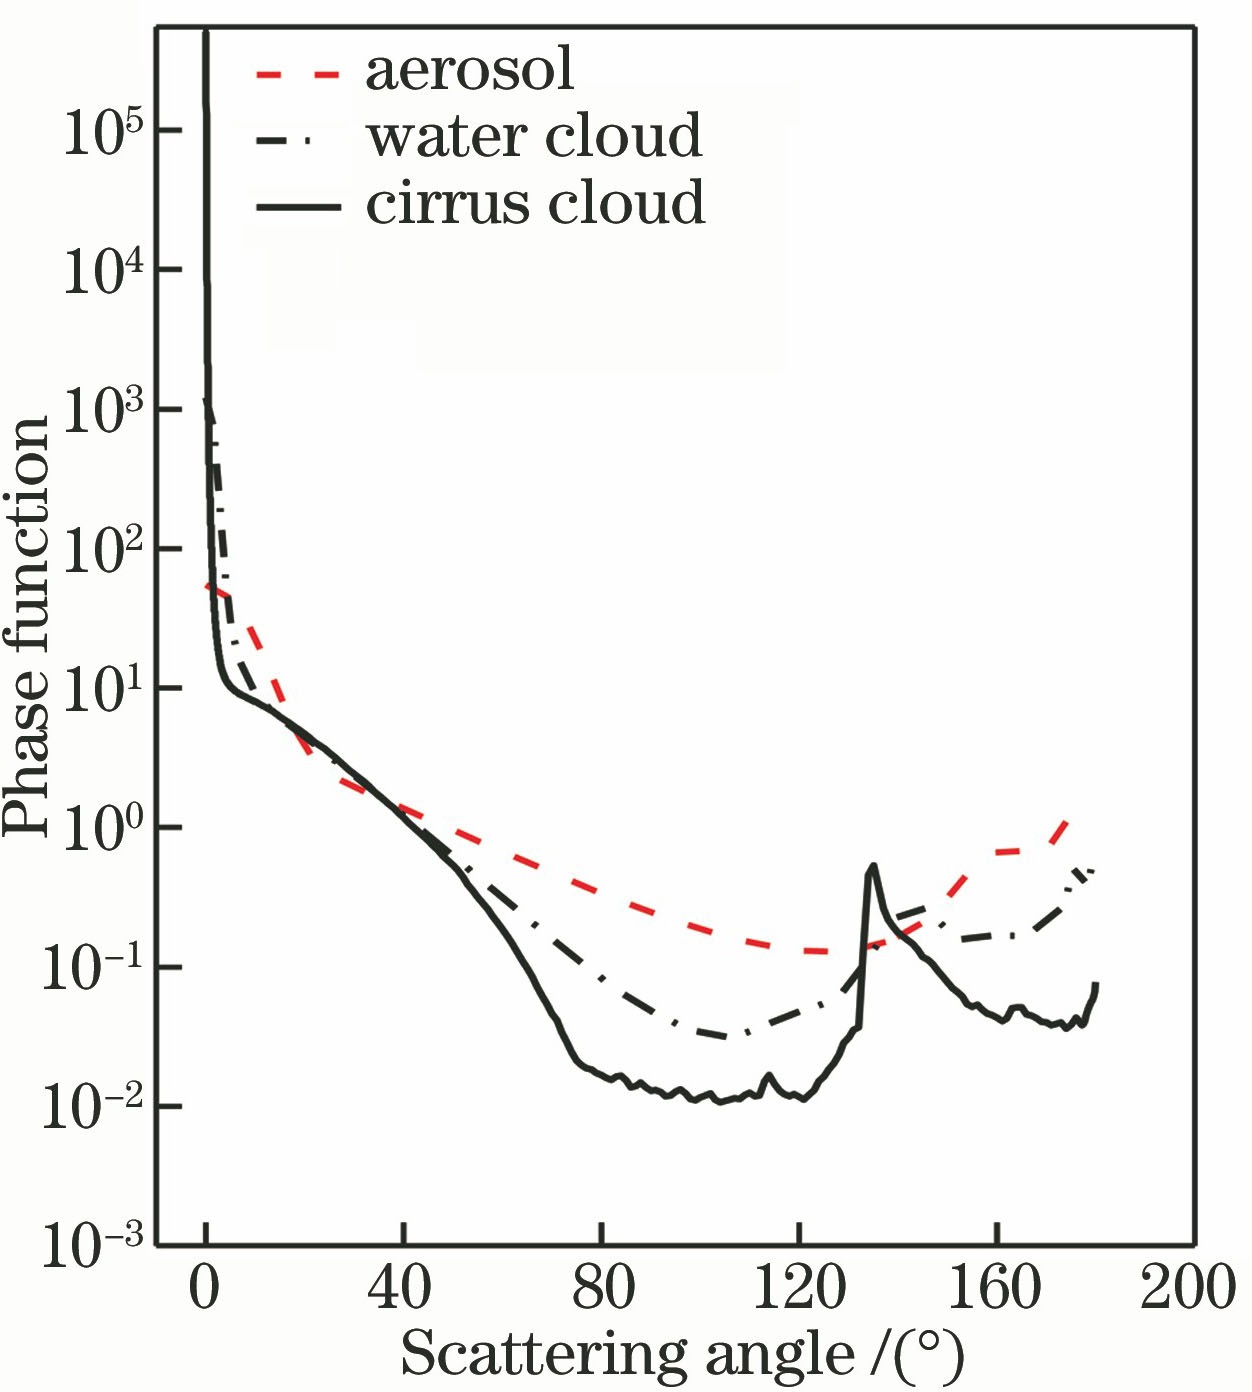 Average phase function of cirrus cloud, water cloud and aerosol